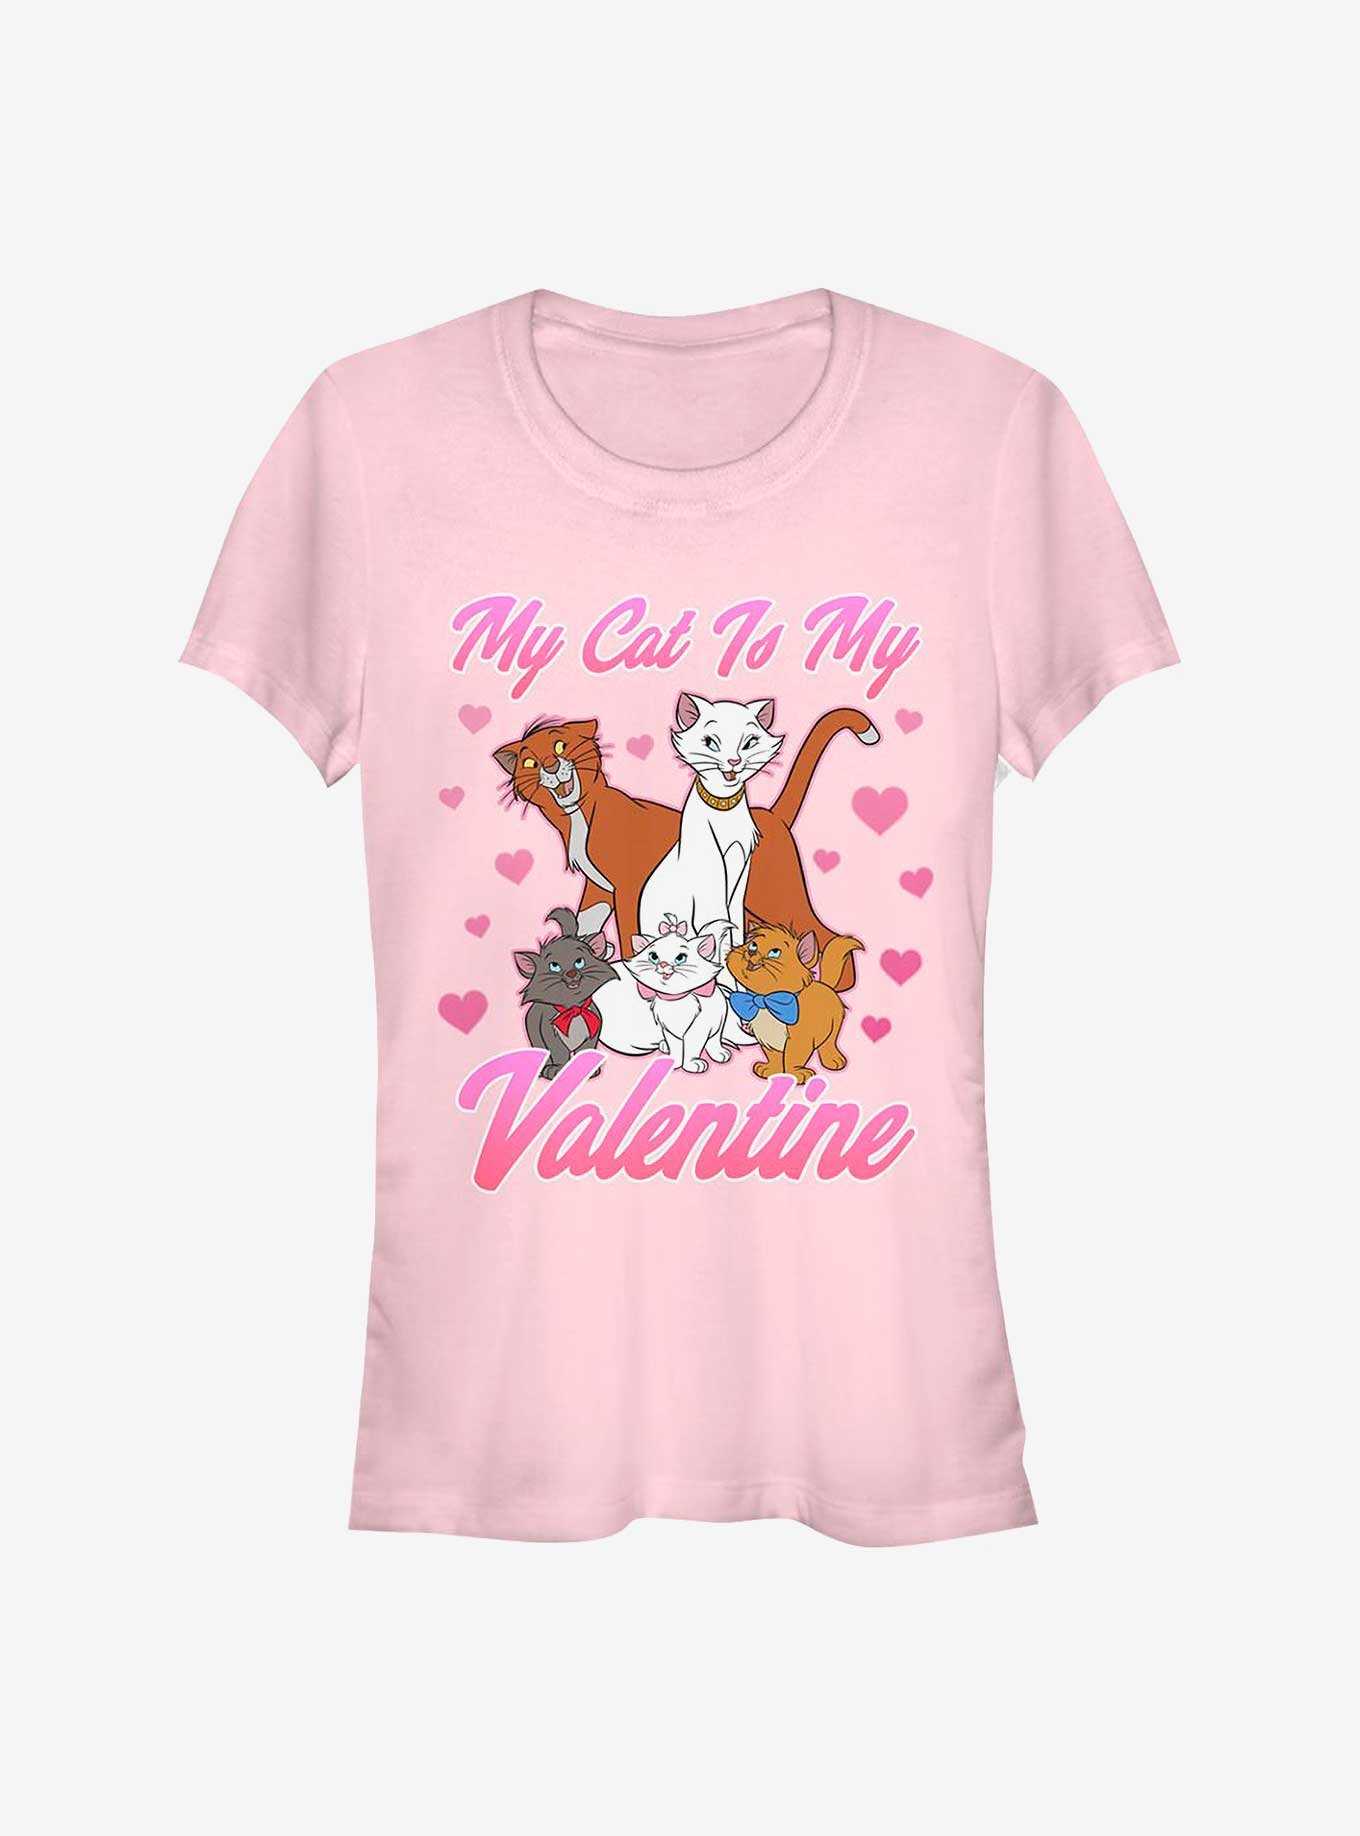 OFFICIAL Aristocats Plushies, Shirts | Topic Hot Merch 